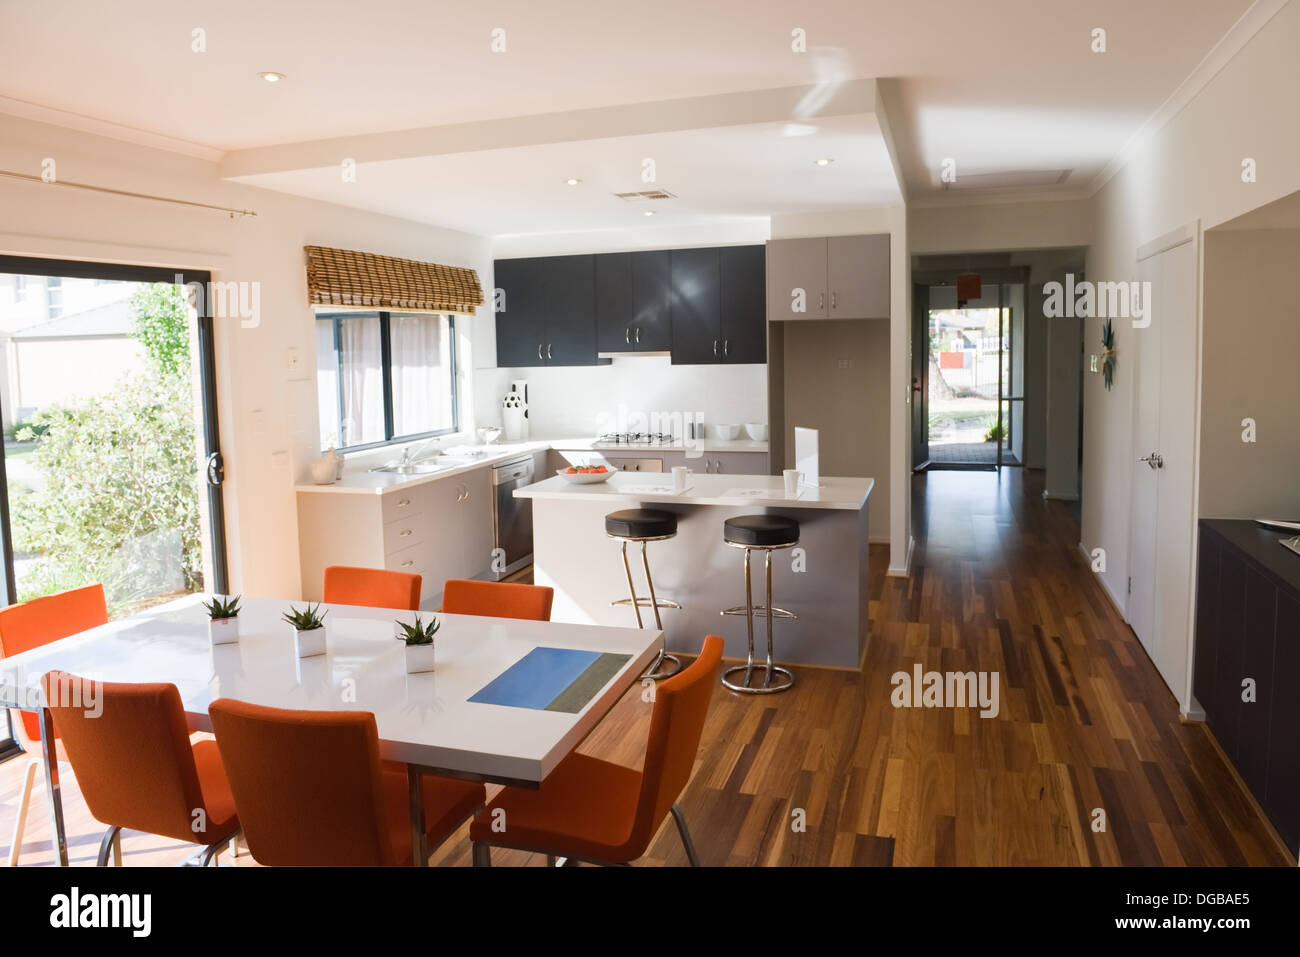 kitchen and meals in a new modern home Stock Photo